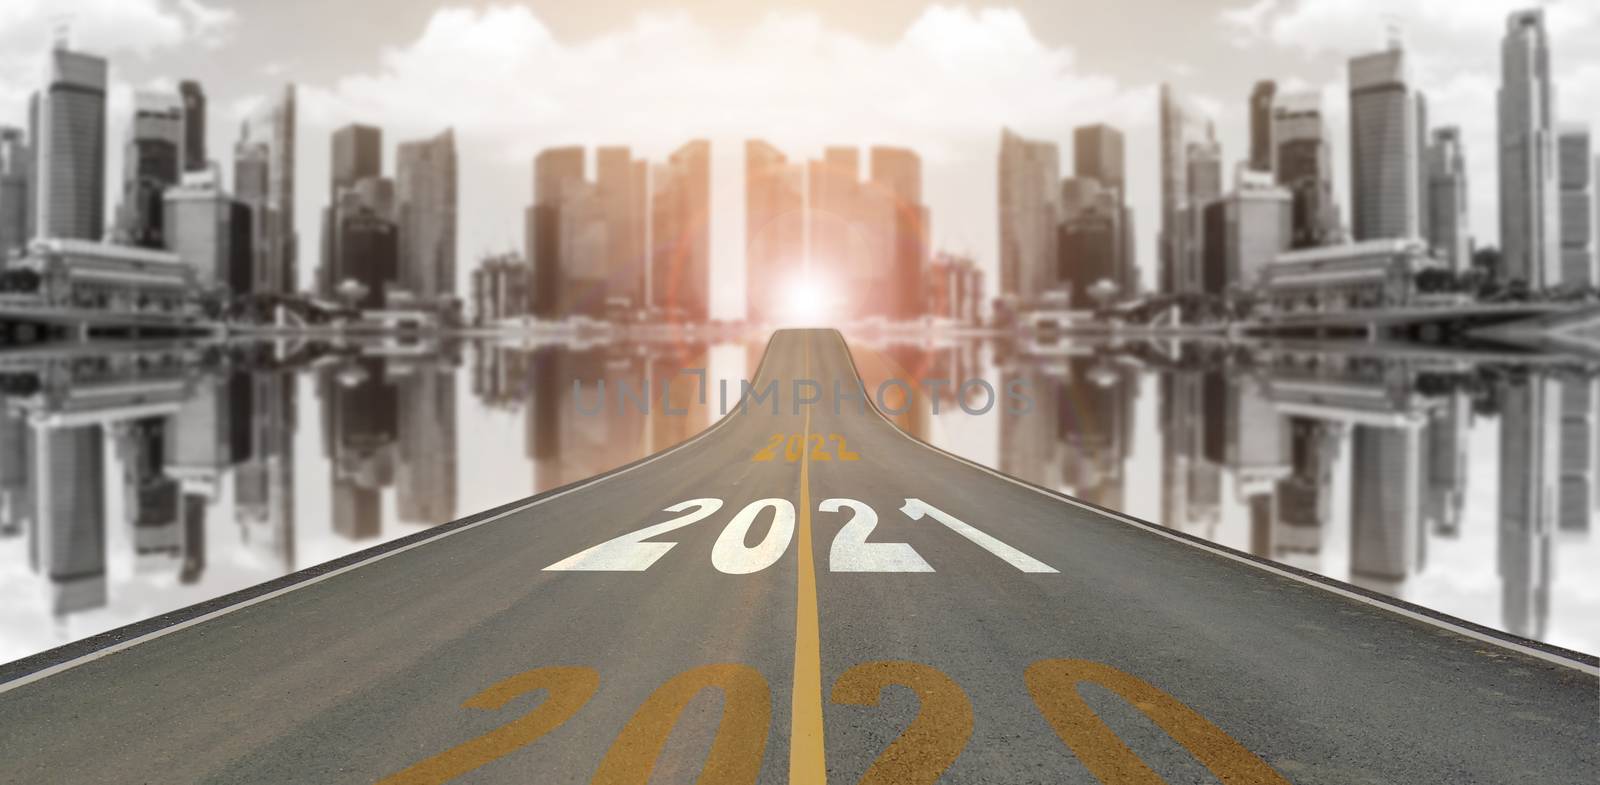 The number 2021 symbol represents the new year on the road heading to the city with beautiful skyscrapers background, New Year's and business target concepts.